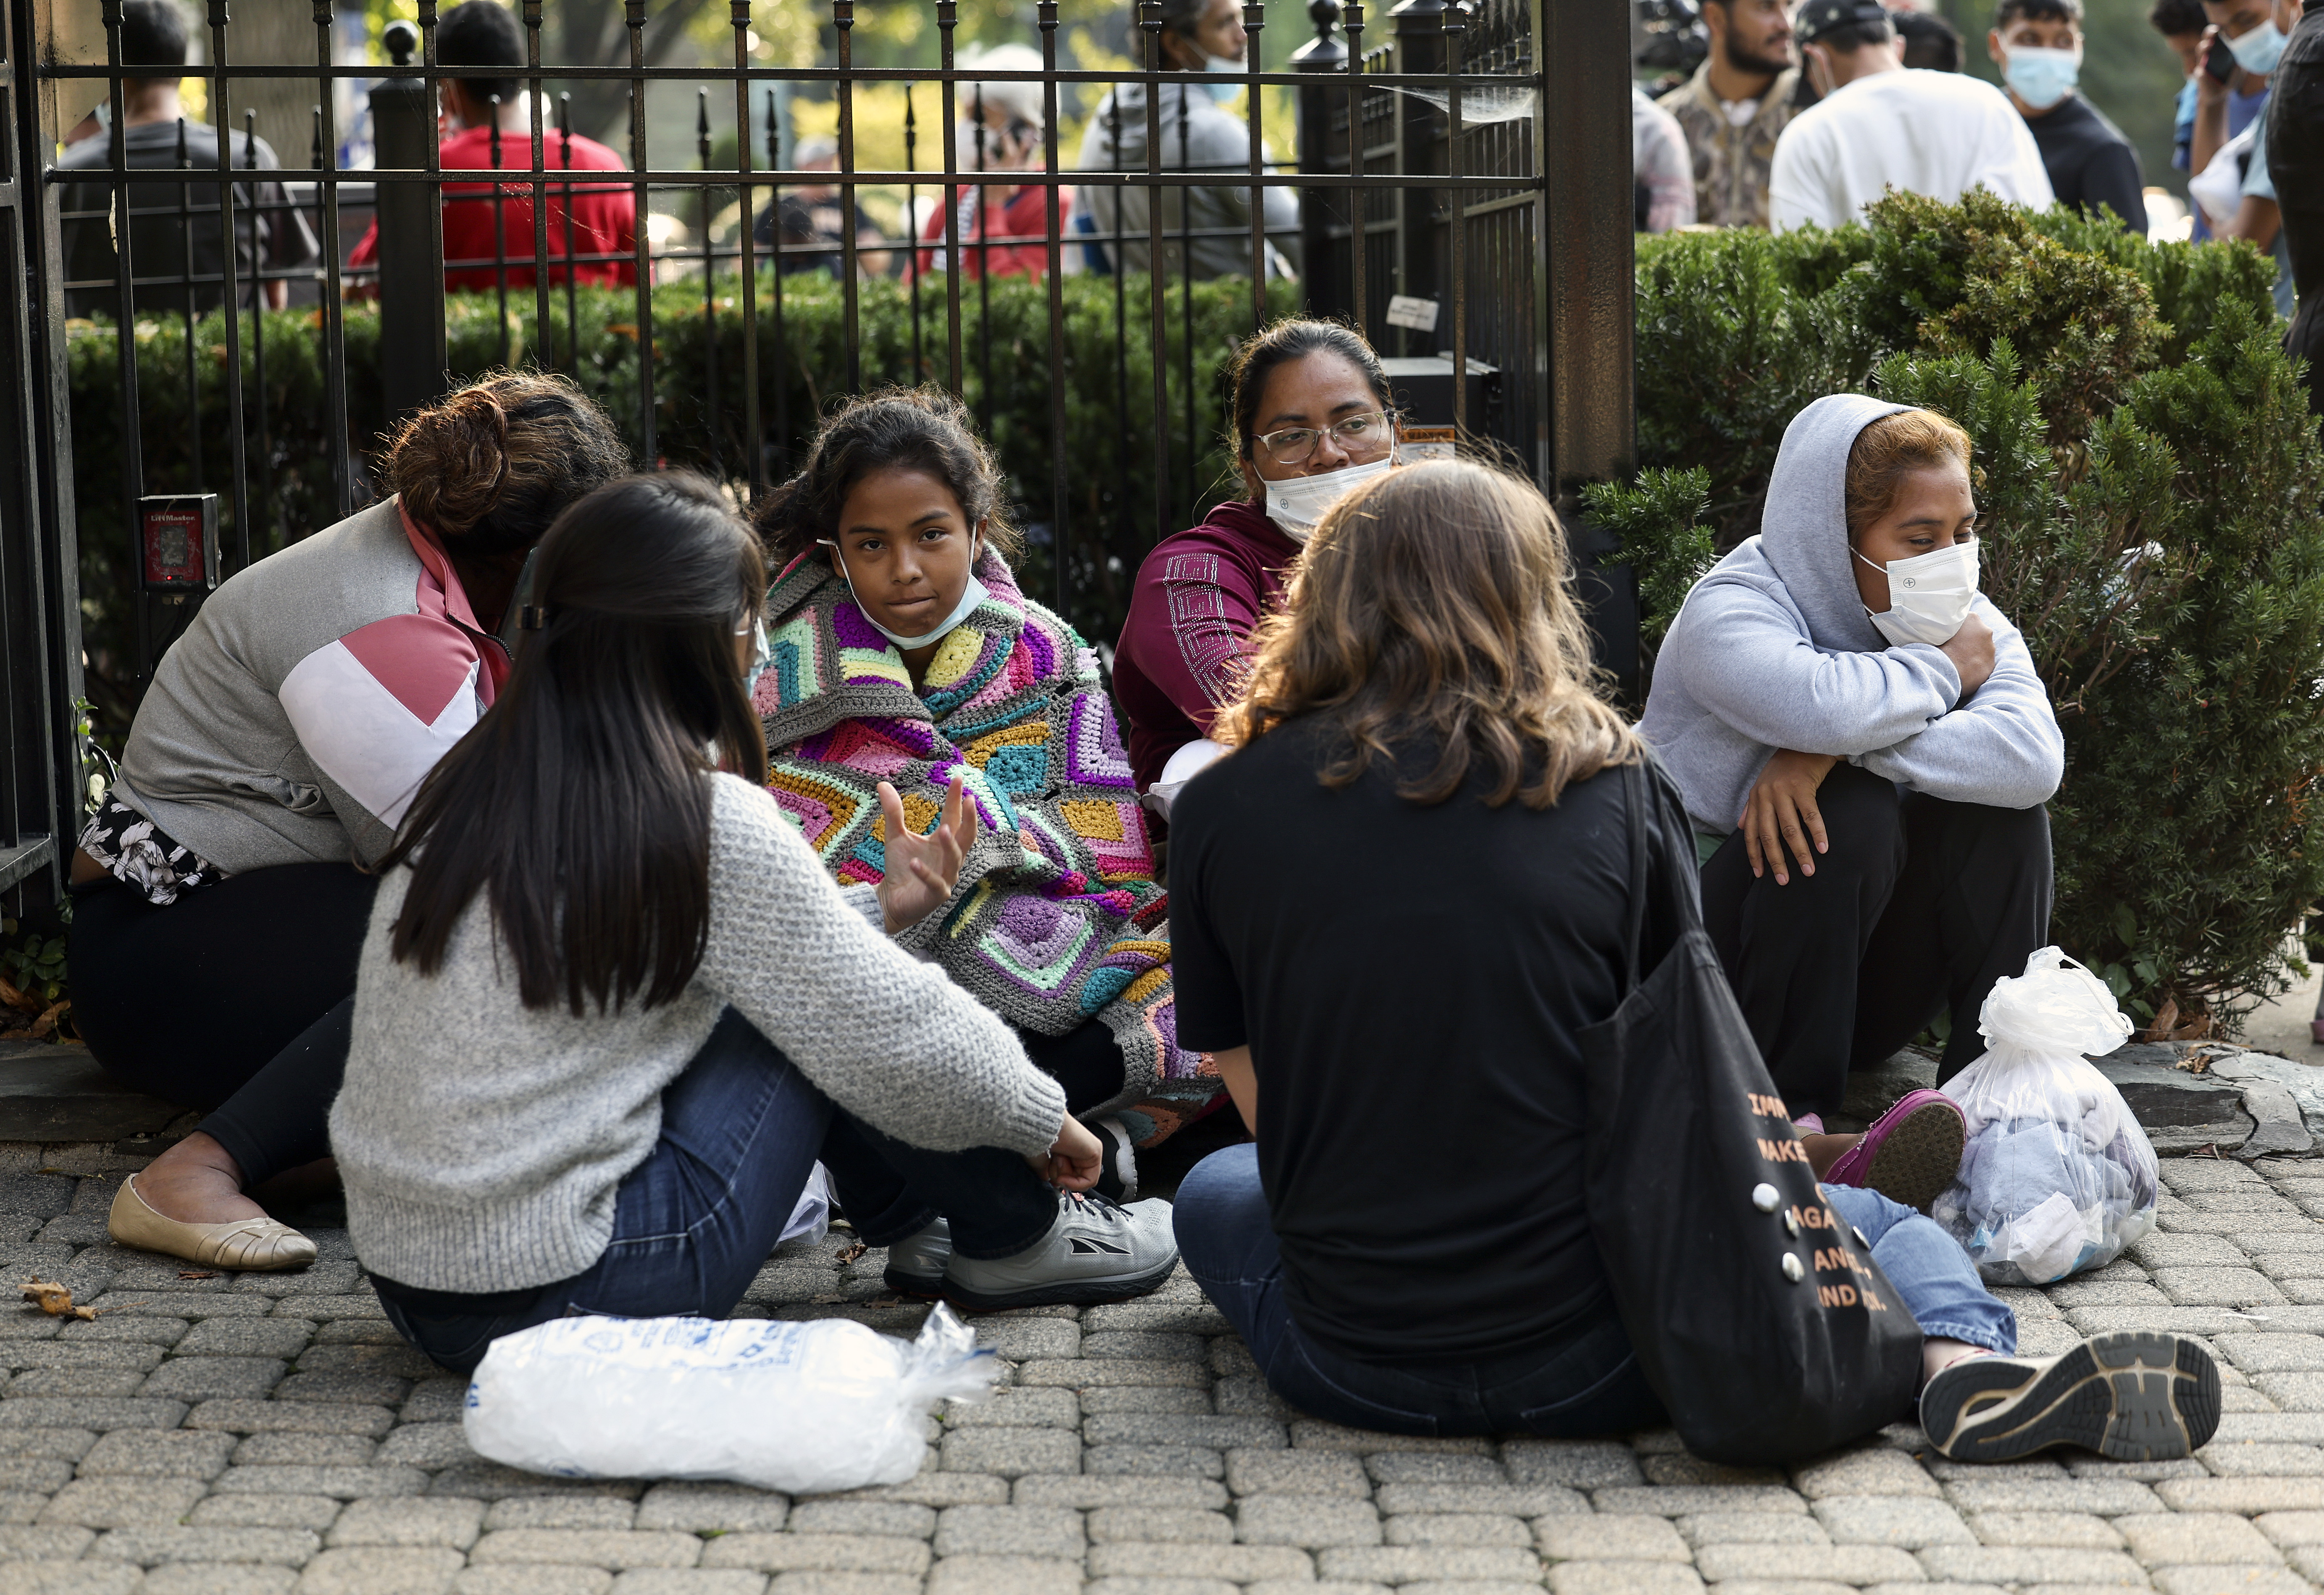 WASHINGTON, DC - SEPTEMBER 15: Migrants from Central and South America wait near the residence of US Vice President Kamala Harris after being dropped off on September 15, 2022 in Washington, DC. Texas Governor Greg Abbott dispatched buses carrying migrants from the southern border to Harris' home early Thursday morning. (Photo by Kevin Dietsch/Getty Images)